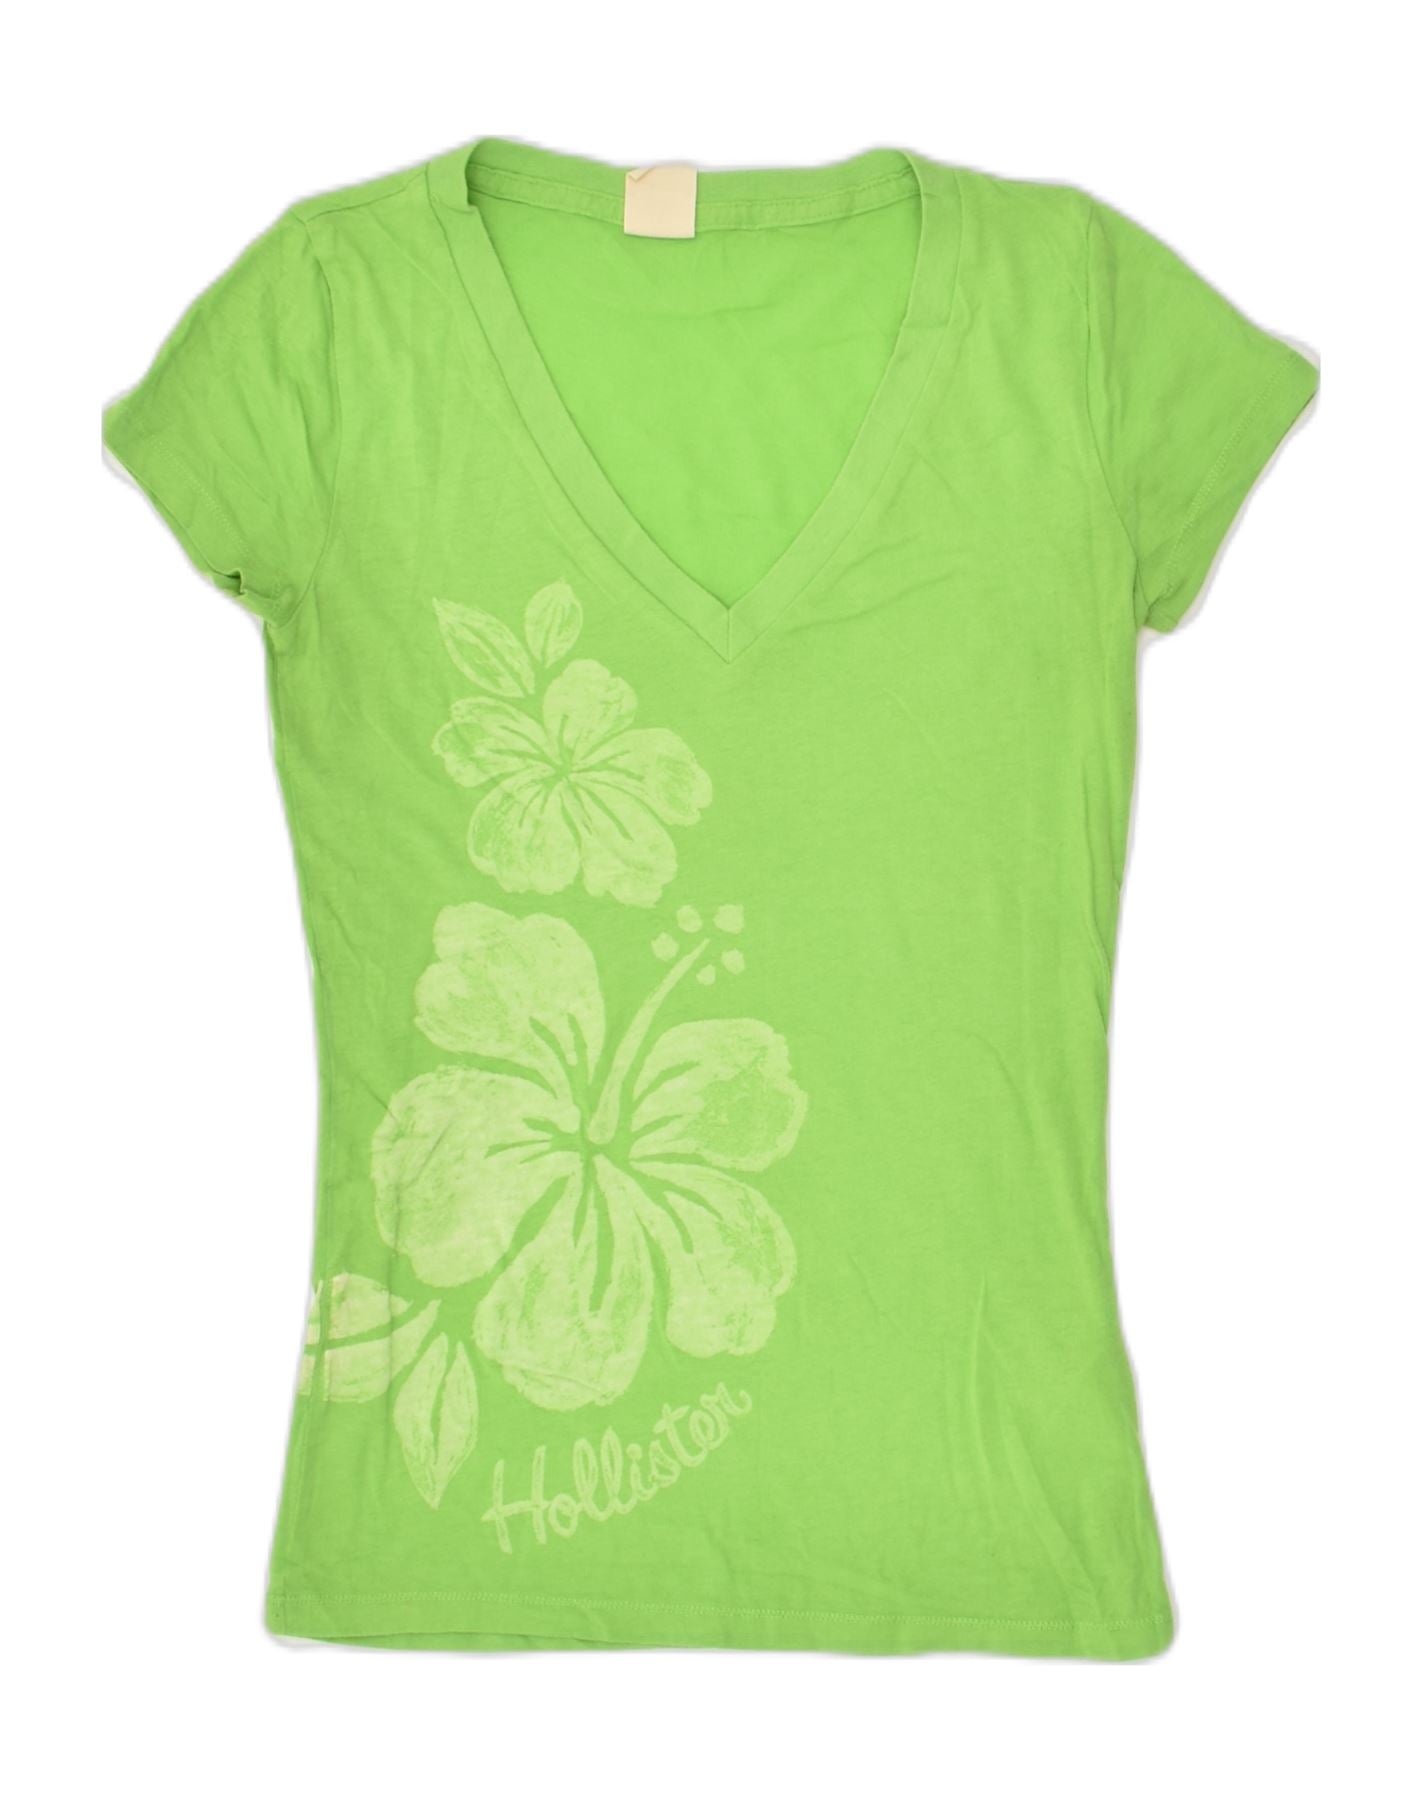 HOLLISTER Womens Graphic T-Shirt Top UK 4 XS Green Floral Cotton, Vintage  & Second-Hand Clothing Online